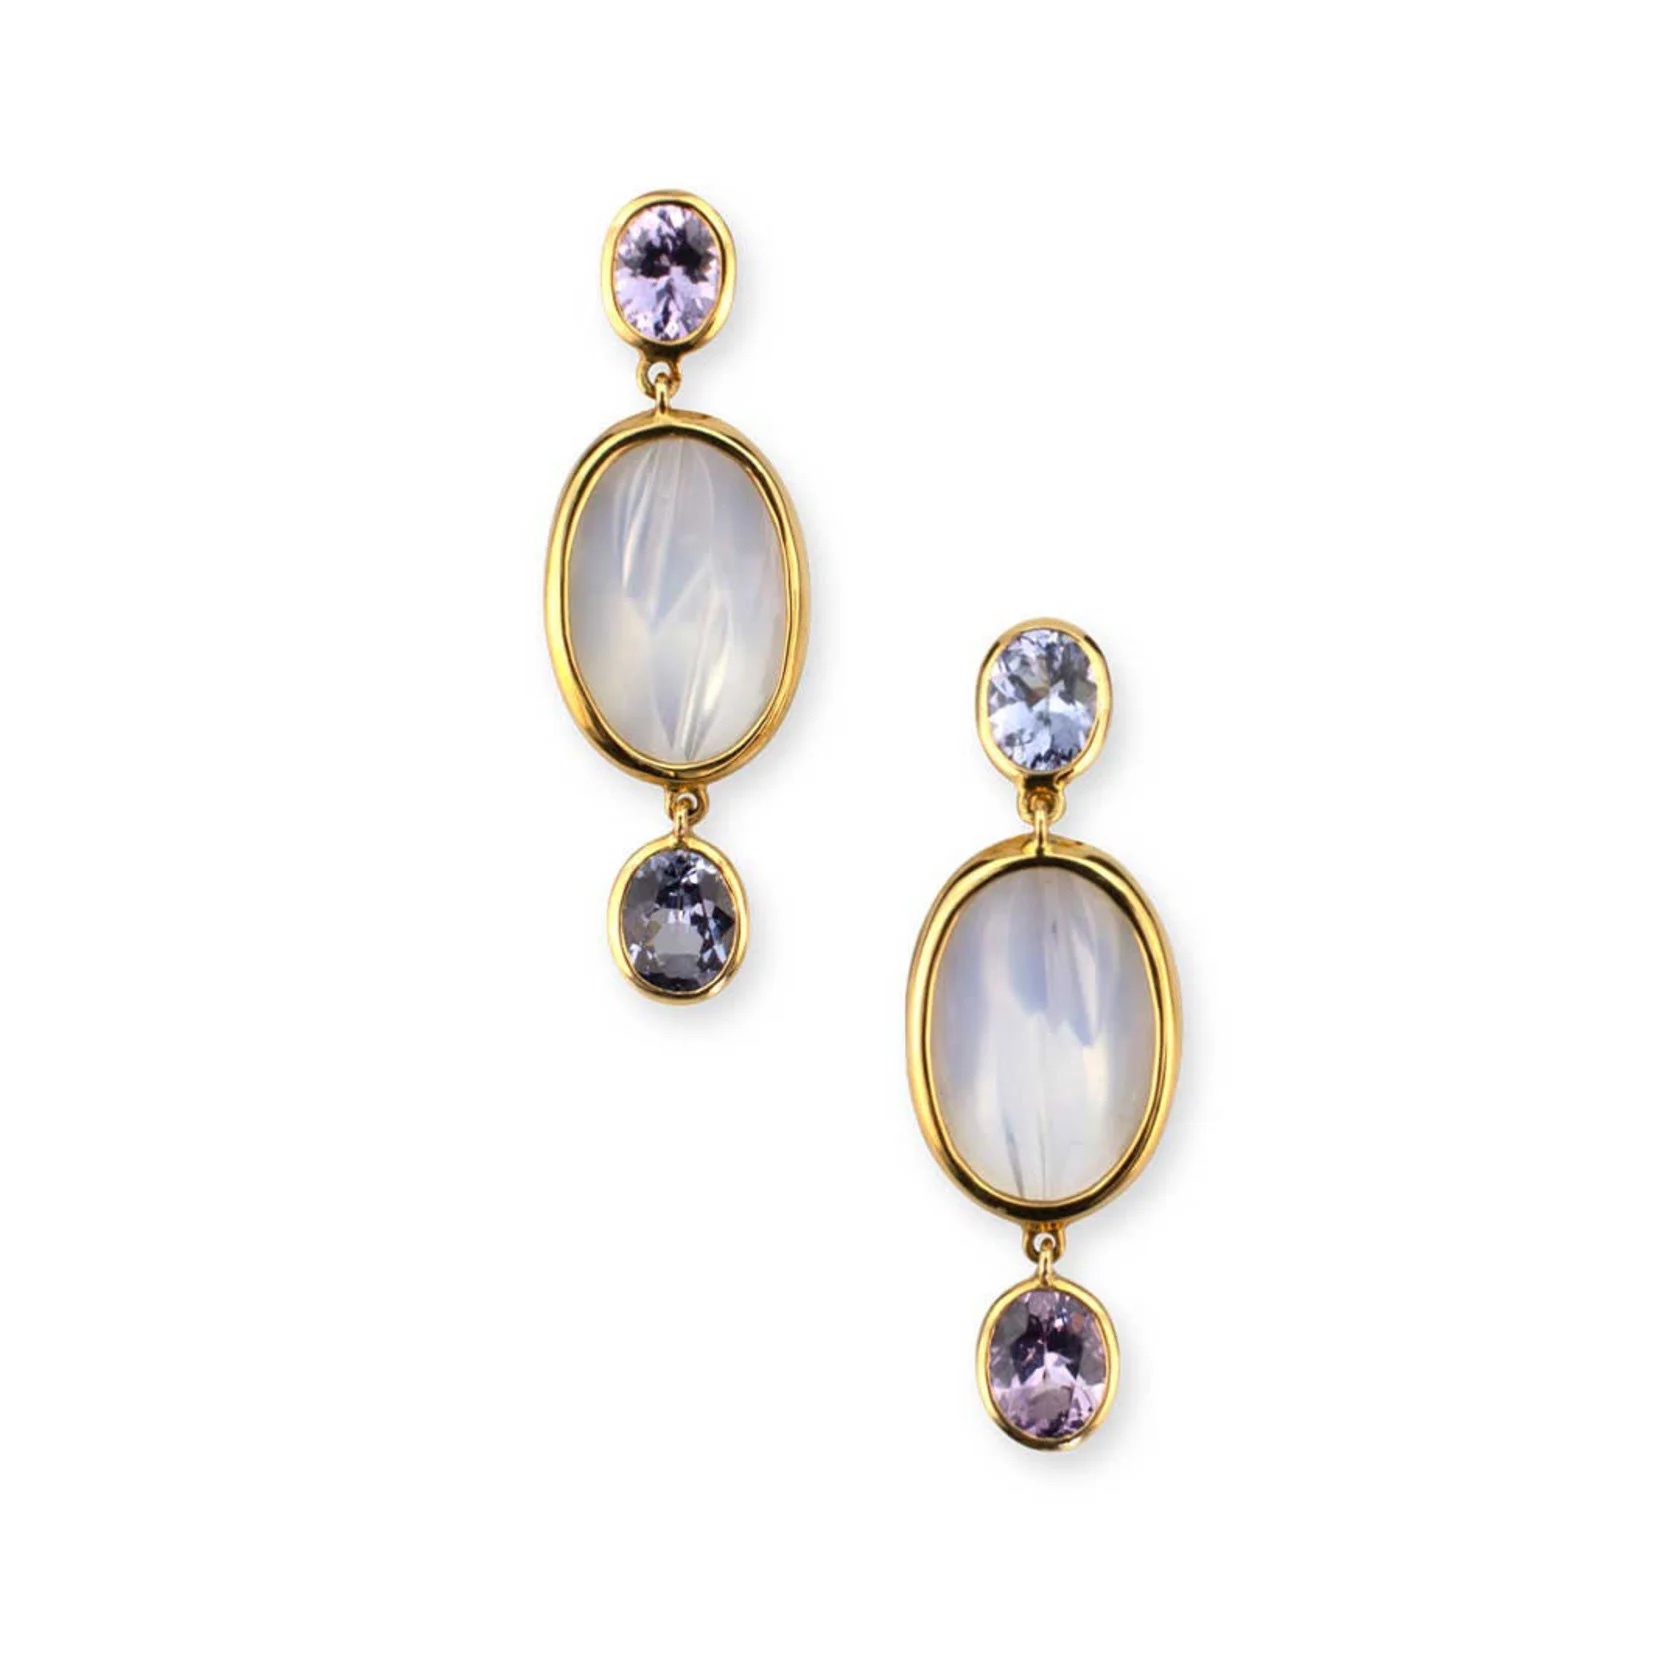 Moonstone and Lavender Spinel Earrings